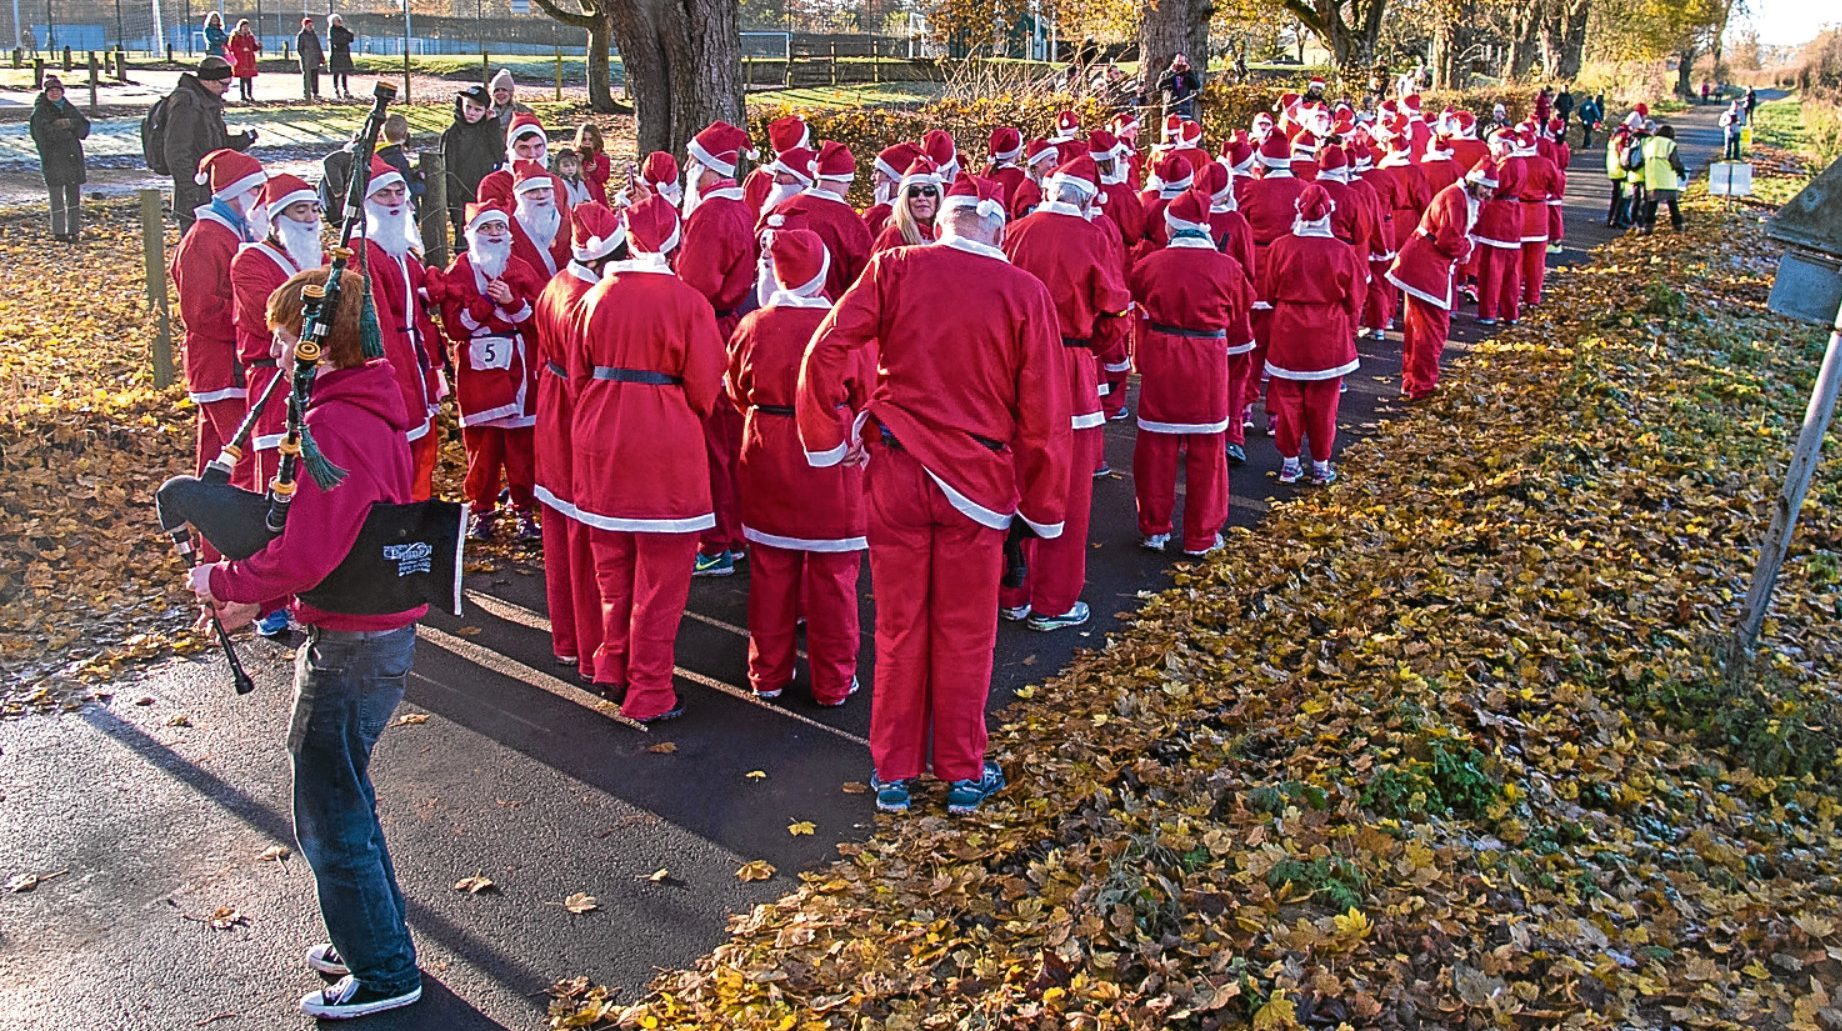 The Santas were out in full force in Cupar's Duffus Park.